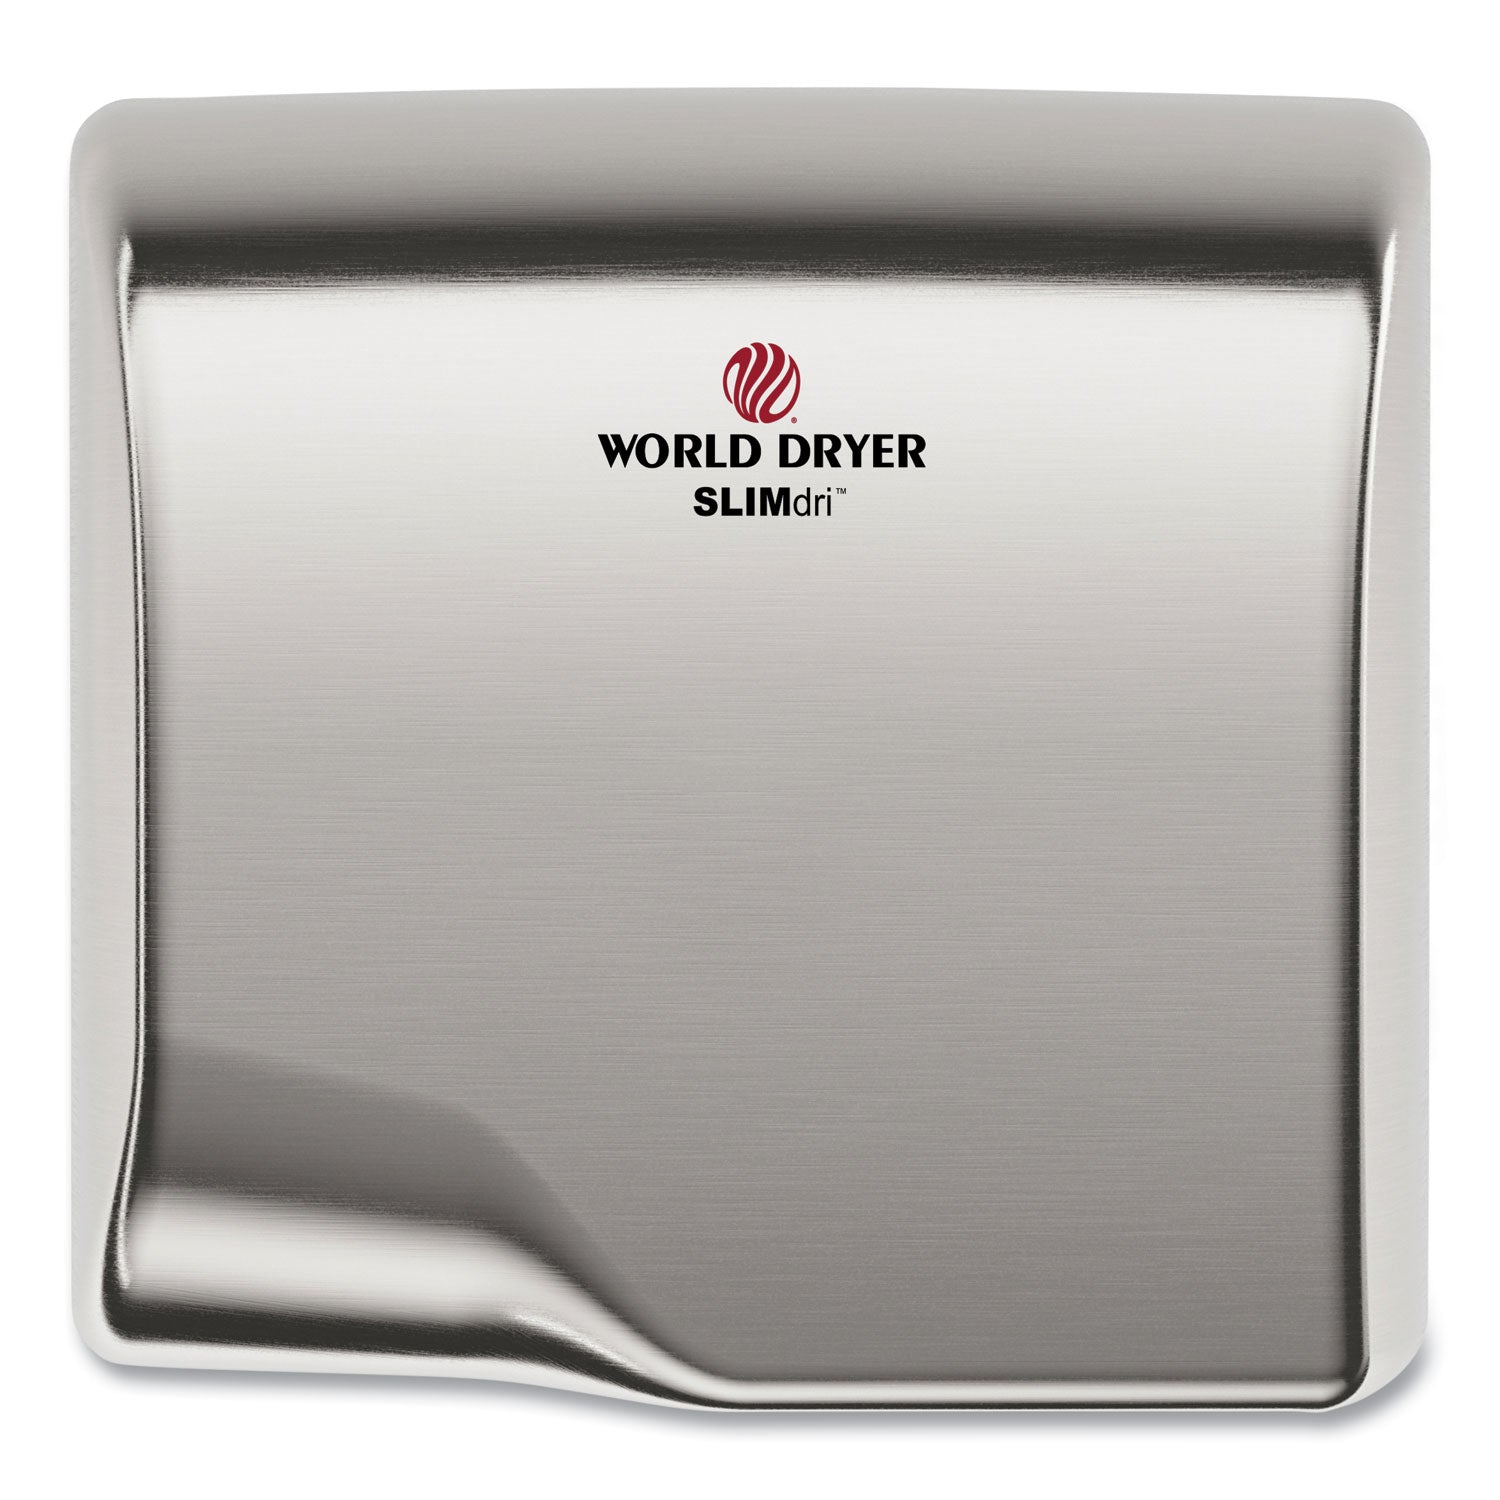 slimdri-hand-dryer-110-240-v-1387-x-13-x-7-brushed-stainless-steel_wrll973a - 1